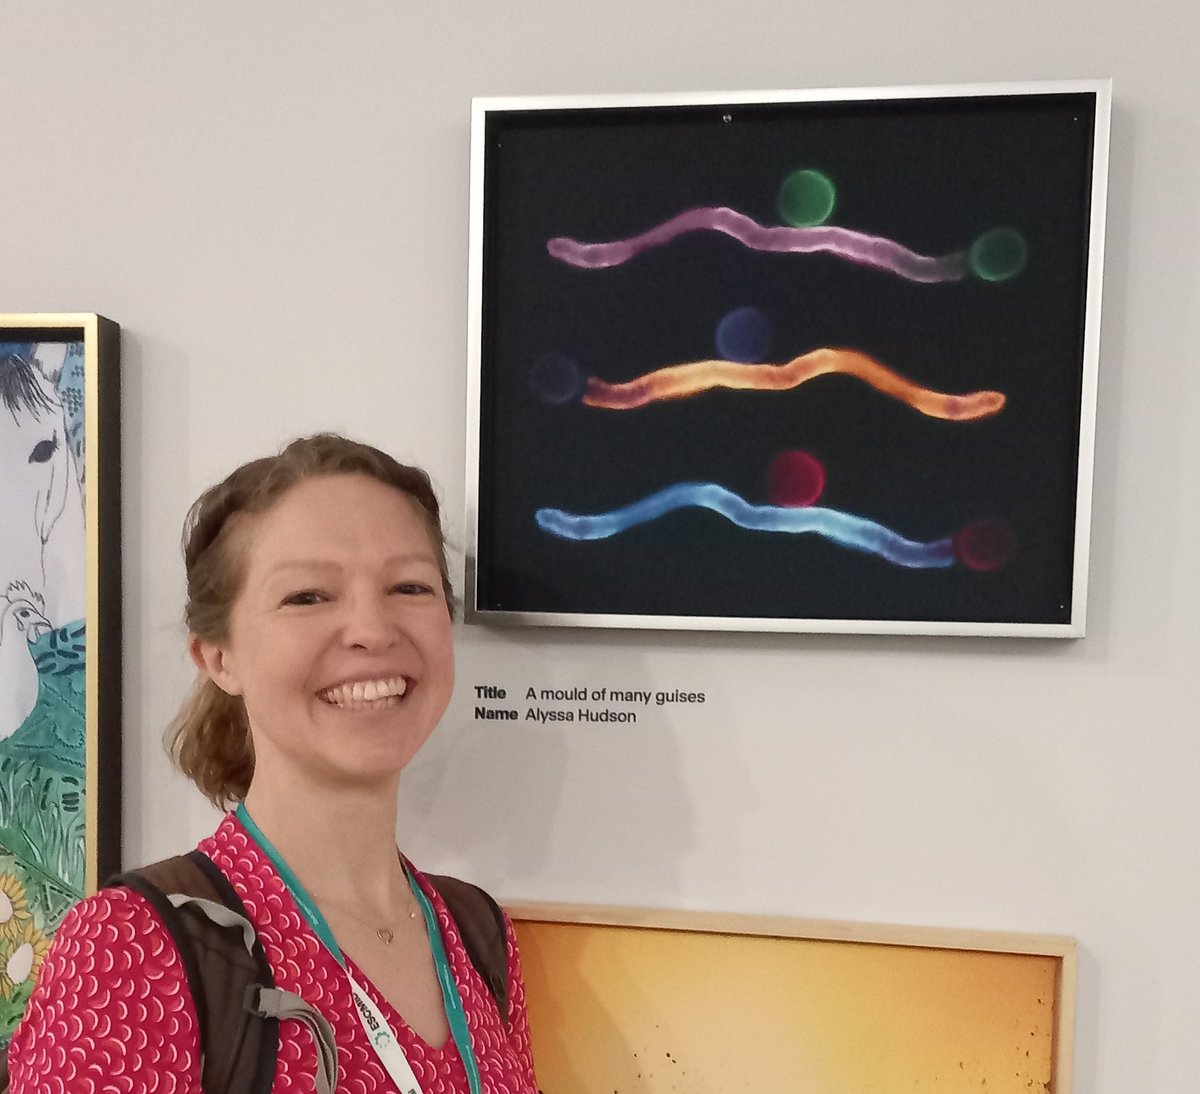 Check out the art gallery at #ECCMID2024 #ESCMIDGlobal2024 My image 'A mould of many guises' takes a One Health perspective on Rhizopus arrhizus, primary cause mucormycosis. Work from @MRCcmm with @BallouLab @NoahsPinkB